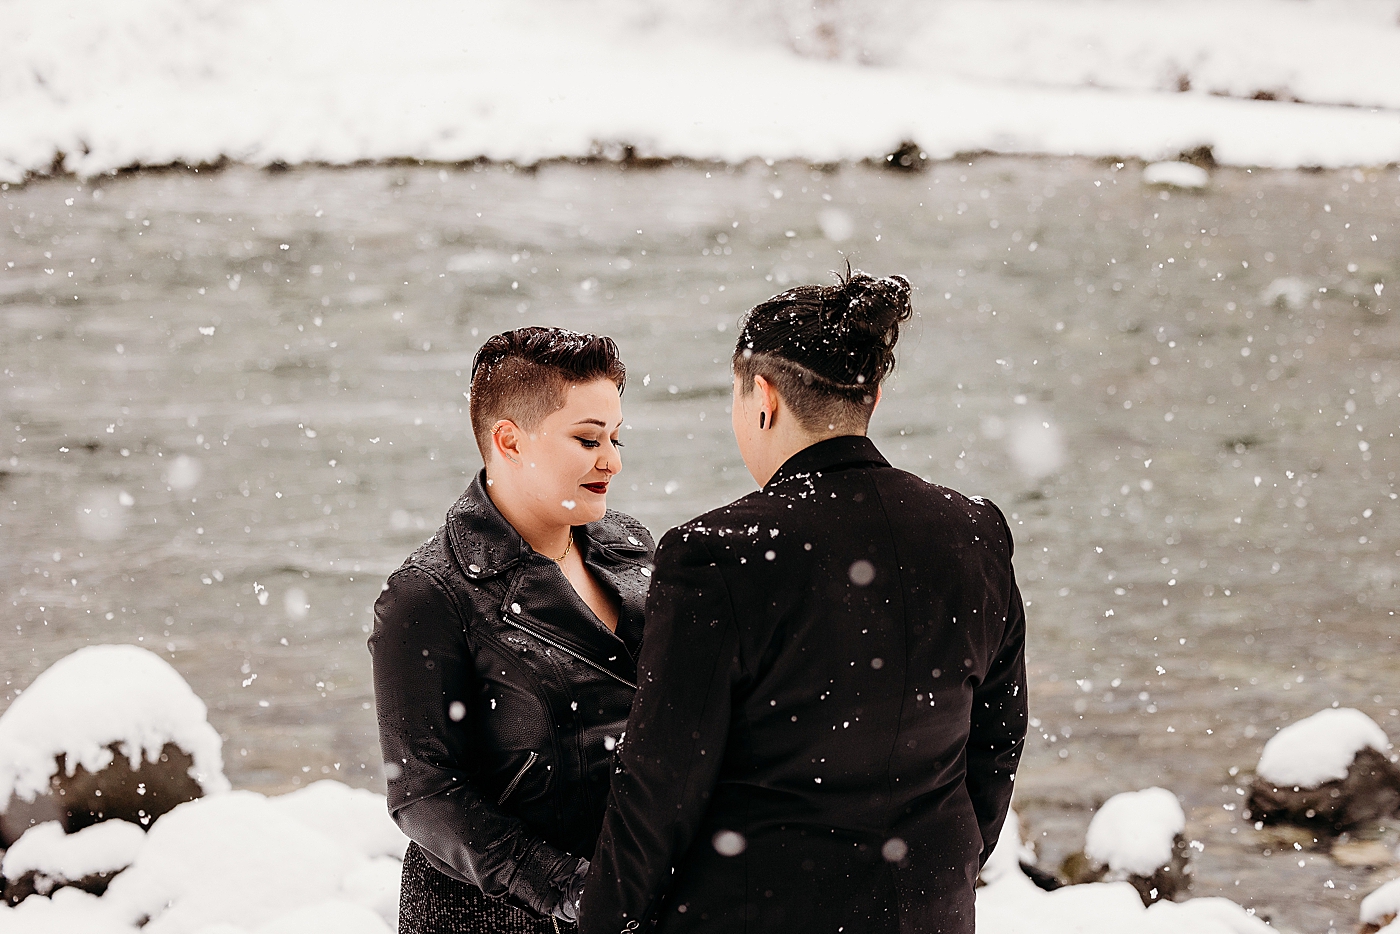 Vow exchange at Middle Fork in the PNW. Photo by Megan Montalvo Photography.